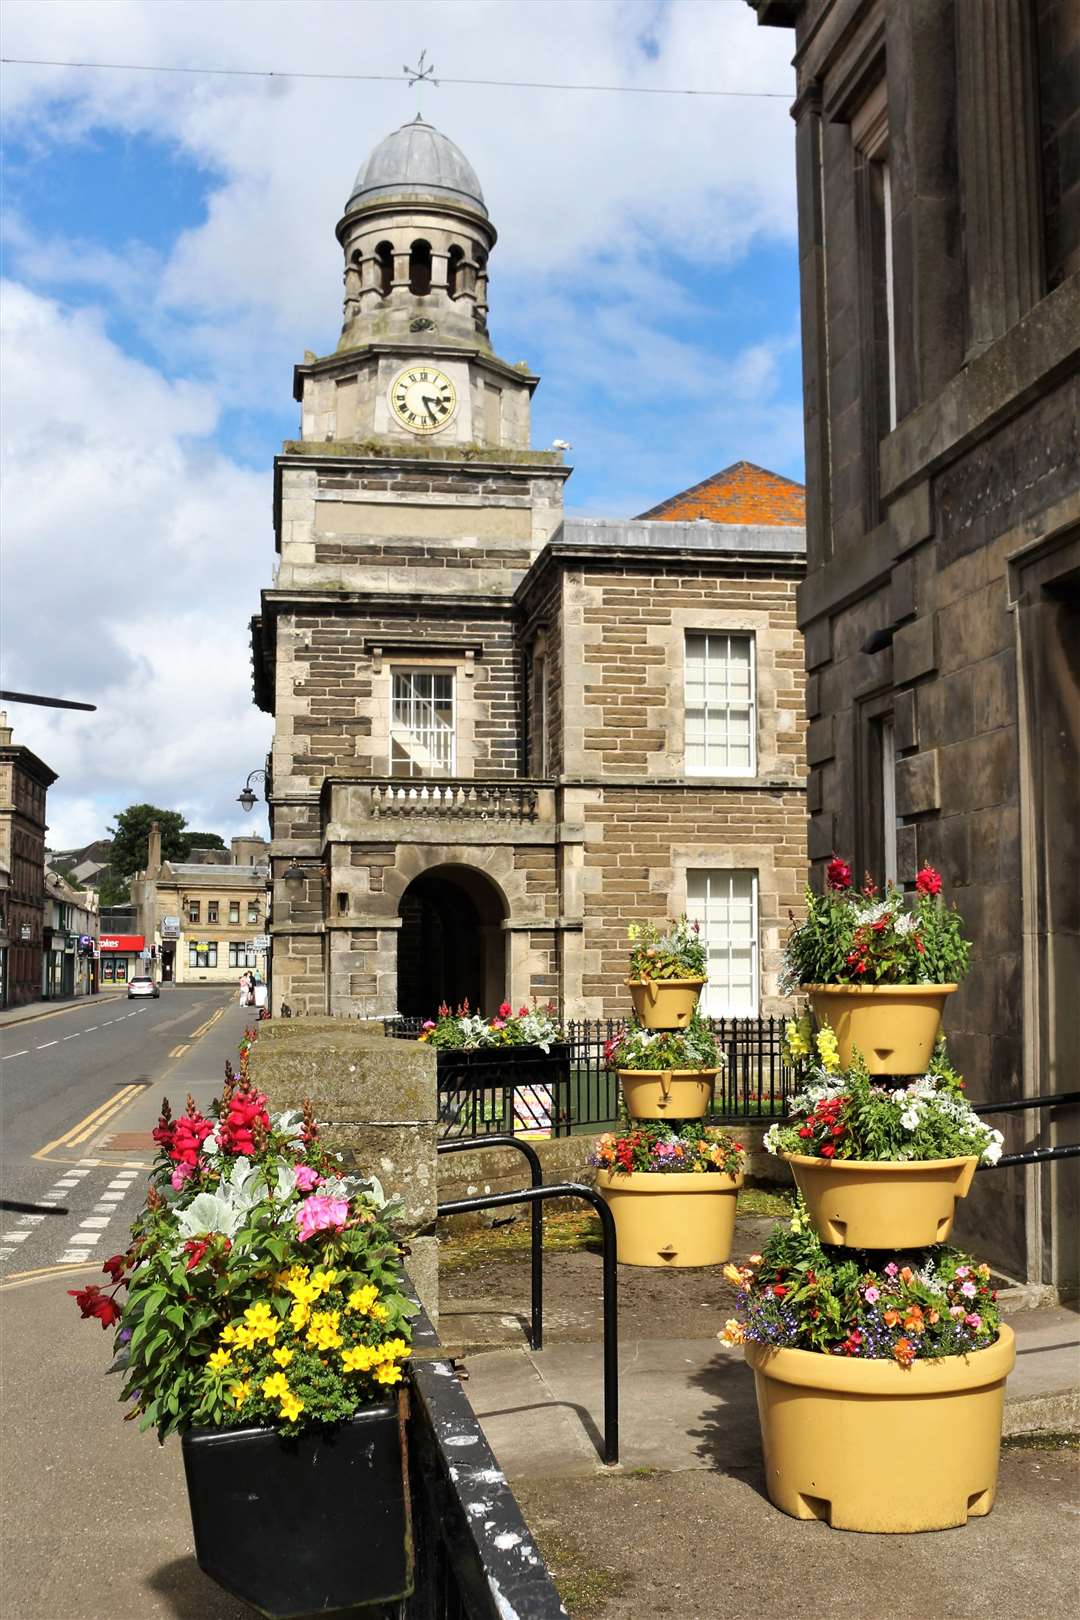 Wick Flower Baskets bring colour to the town. Picture: Eswyl Fell